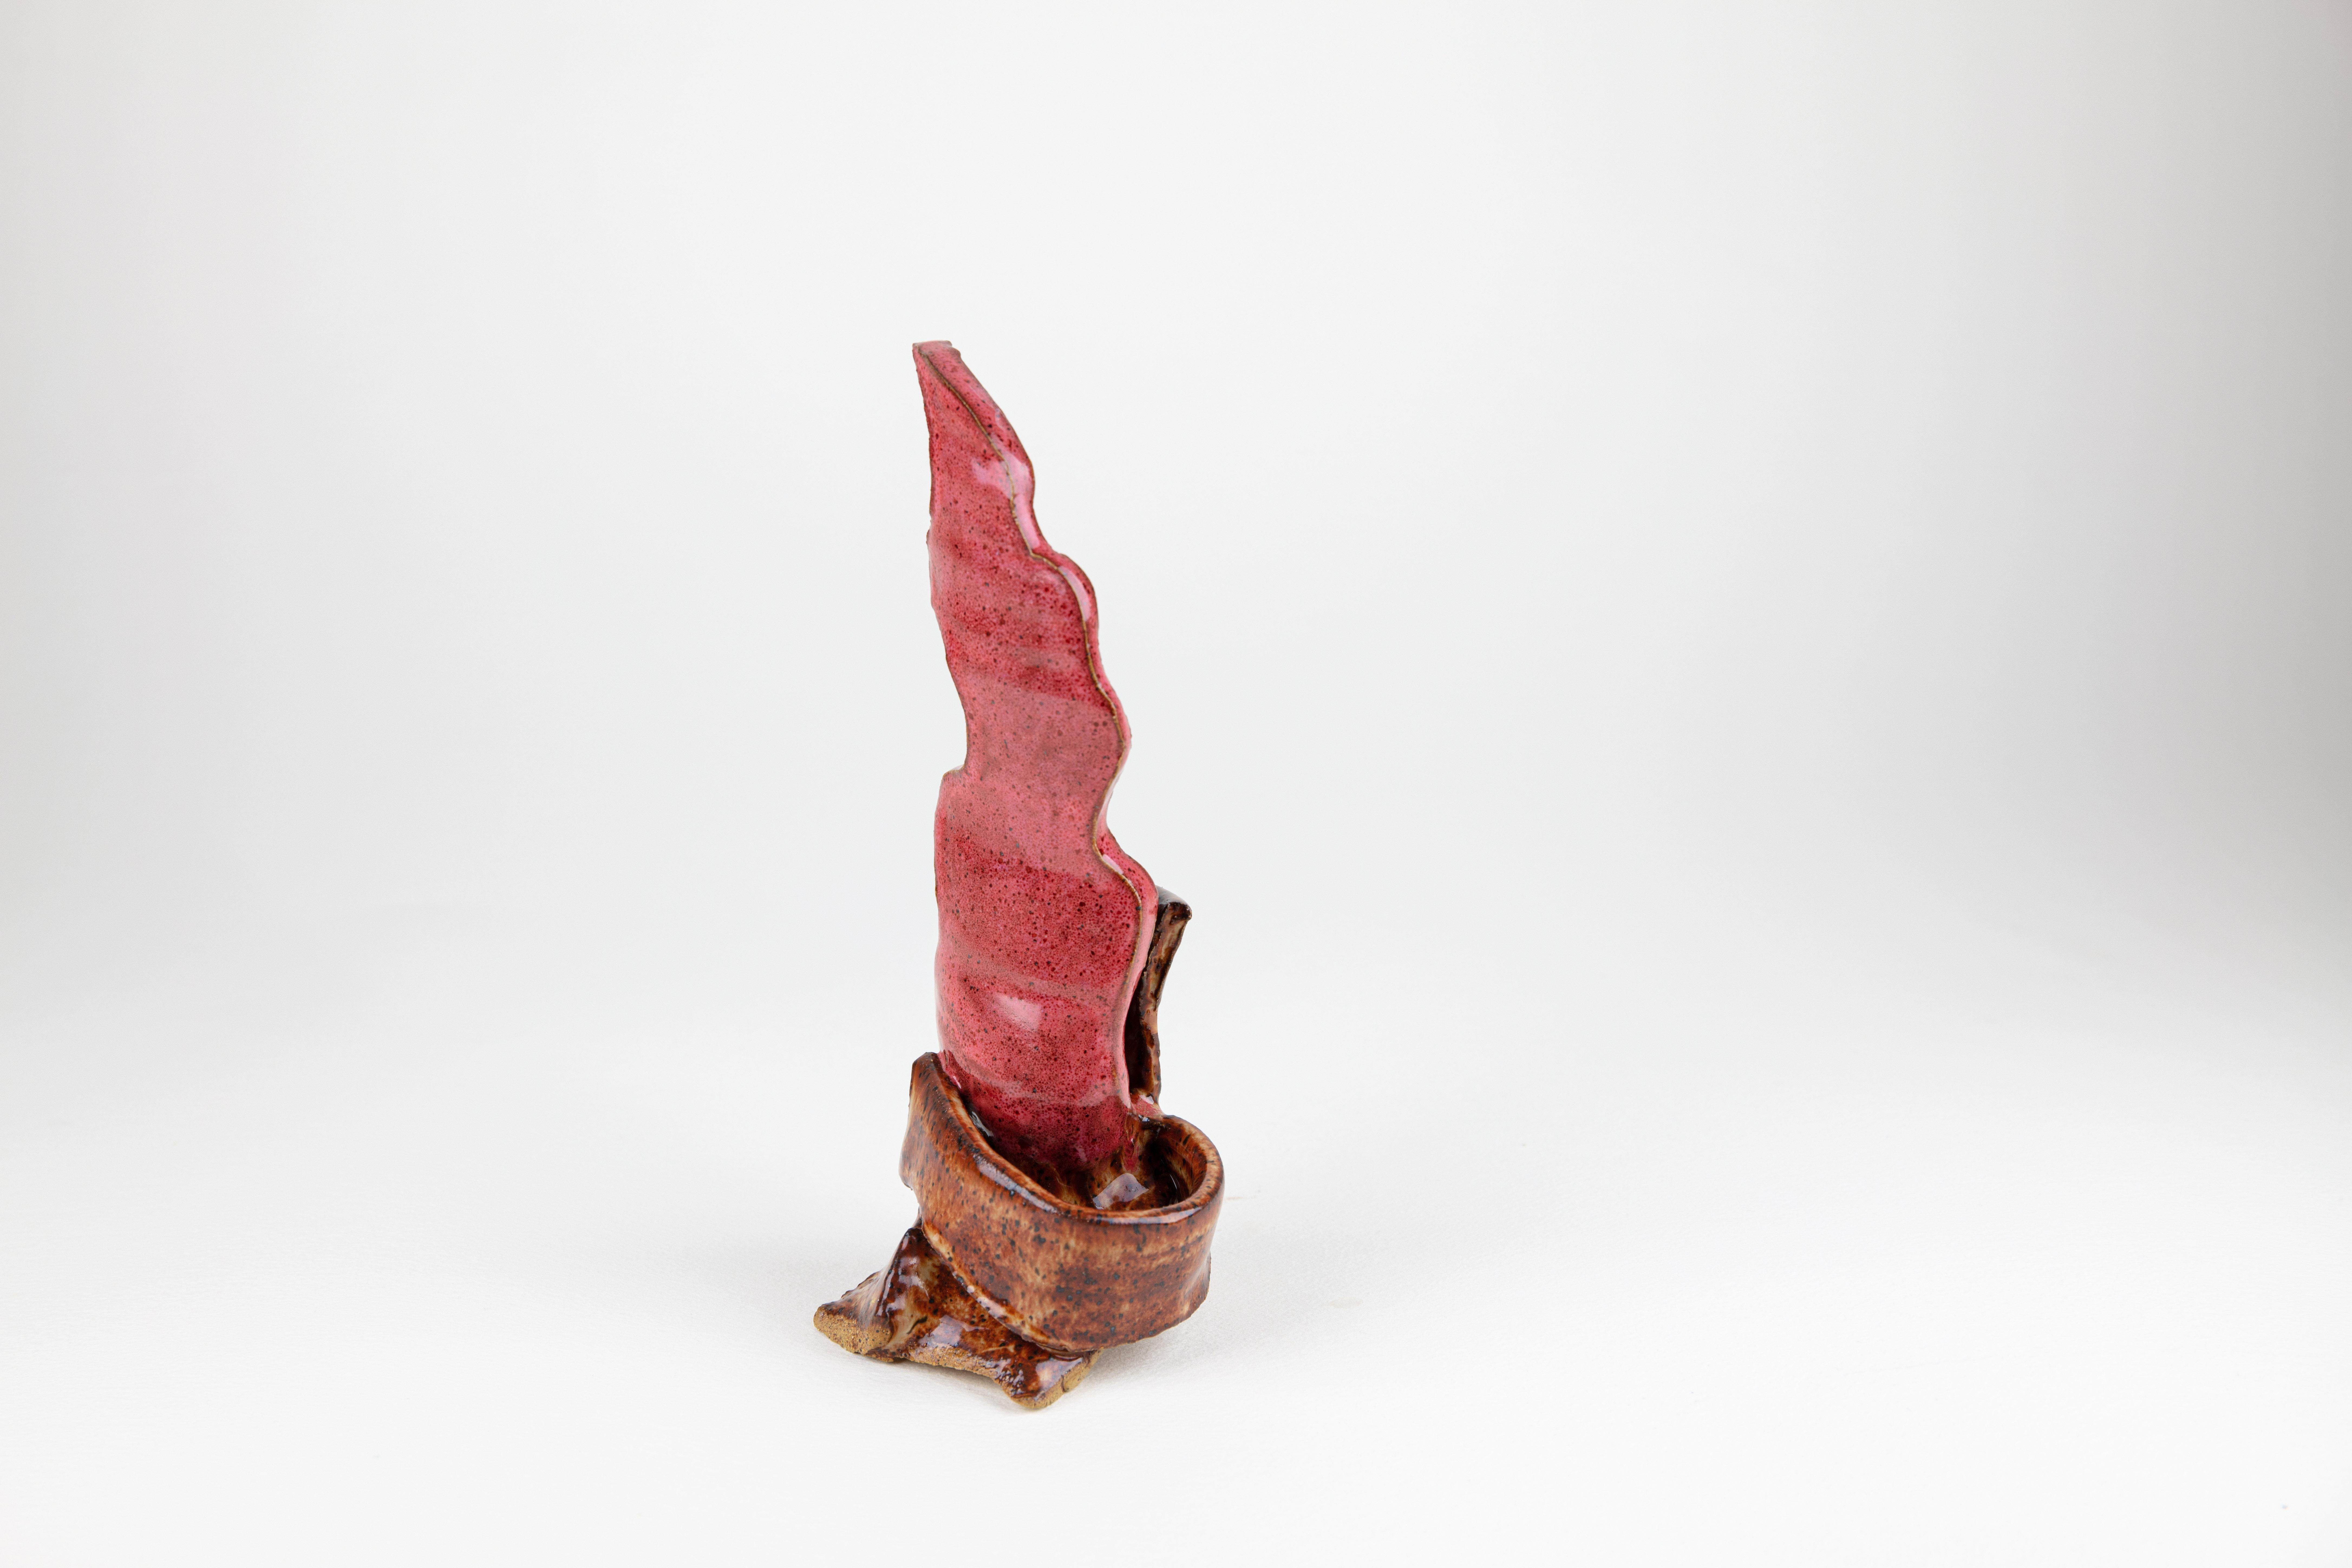 Shoots 2, Abstract ceramic sculpture, red and brown - Contemporary Sculpture by Rachelle Krieger